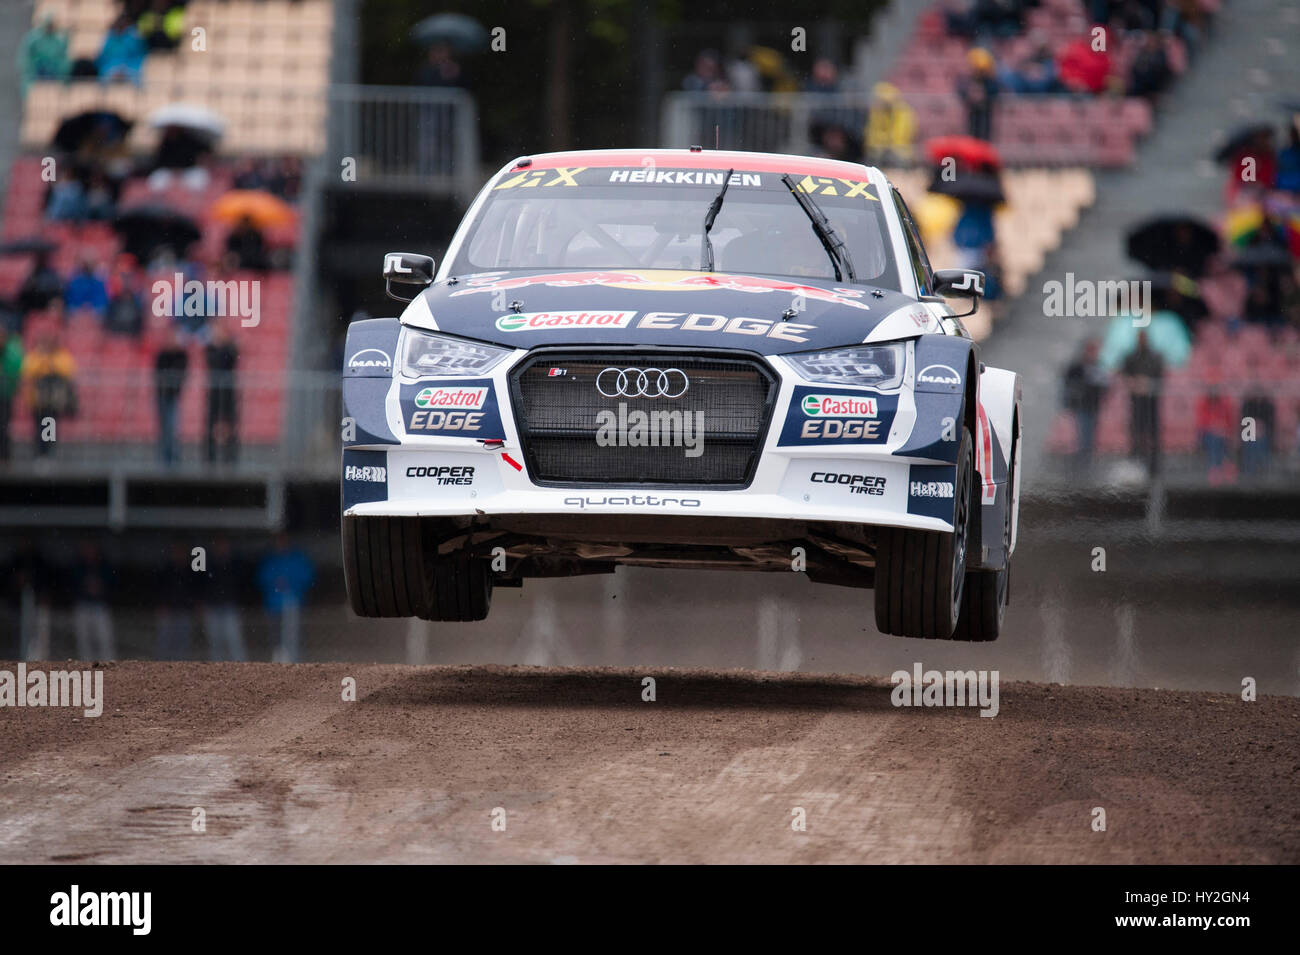 Barcelona, Spain. 1 April, 2017. The Audi S1 World RX car, driven by Toomas Heikkinen, in action during the Round 1 - Rallycross of Barcelona at the Circuit of Catalunya. Credit: Pablo Guillen/Alamy Live News Stock Photo